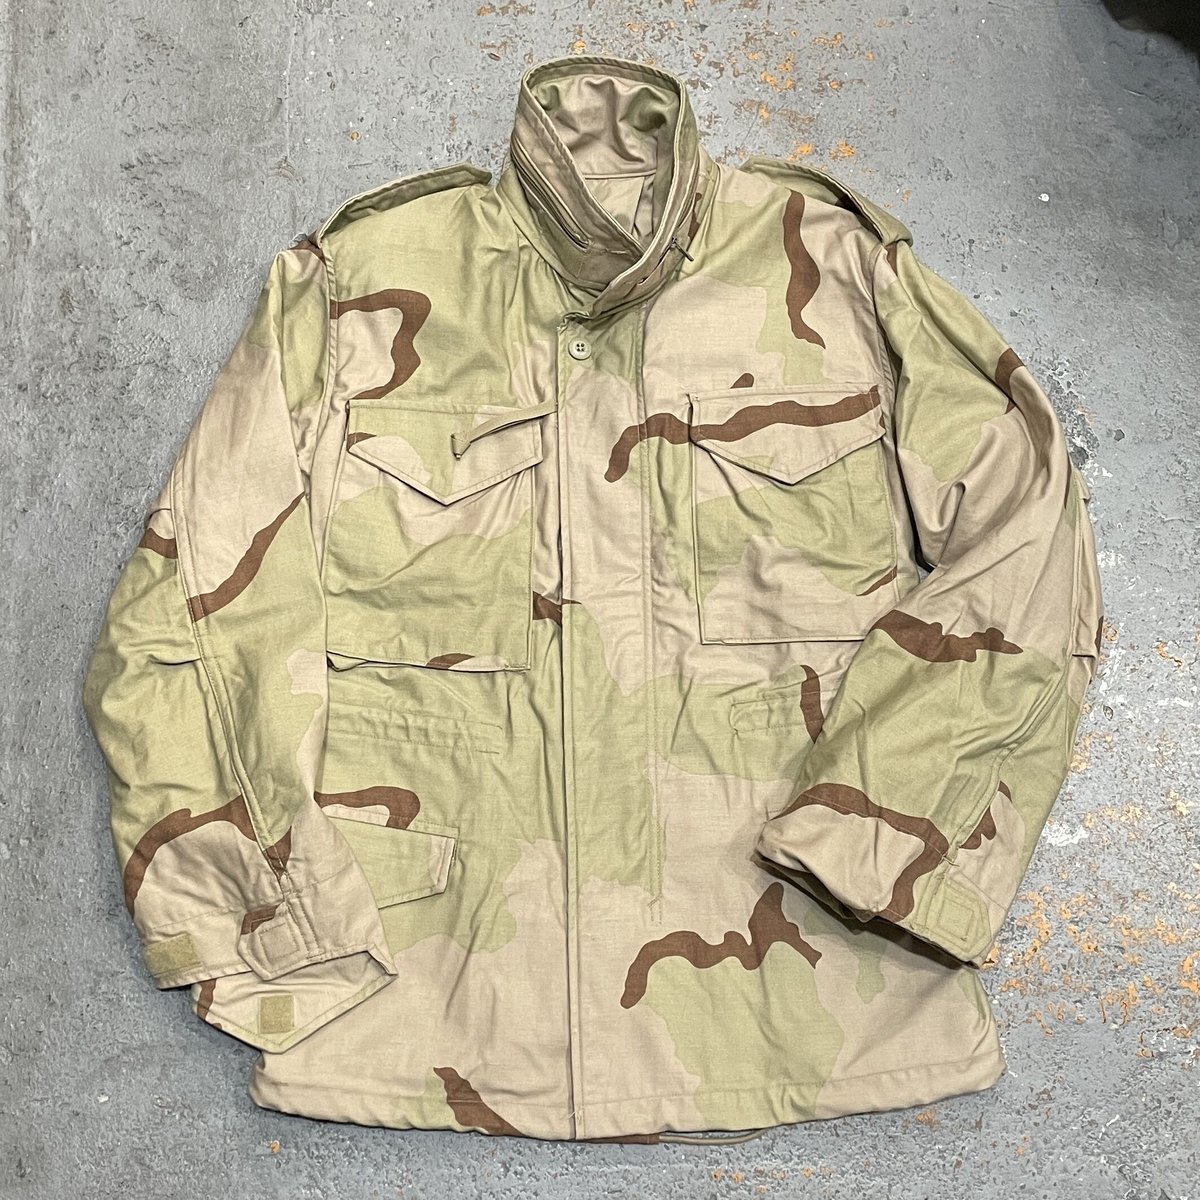 [Dead Stock] 1991 U.S.ARMY M-65 Field Jacket DESERT CAMOUFLAGE Made in USA  SIZE : X-SMALL SHORT